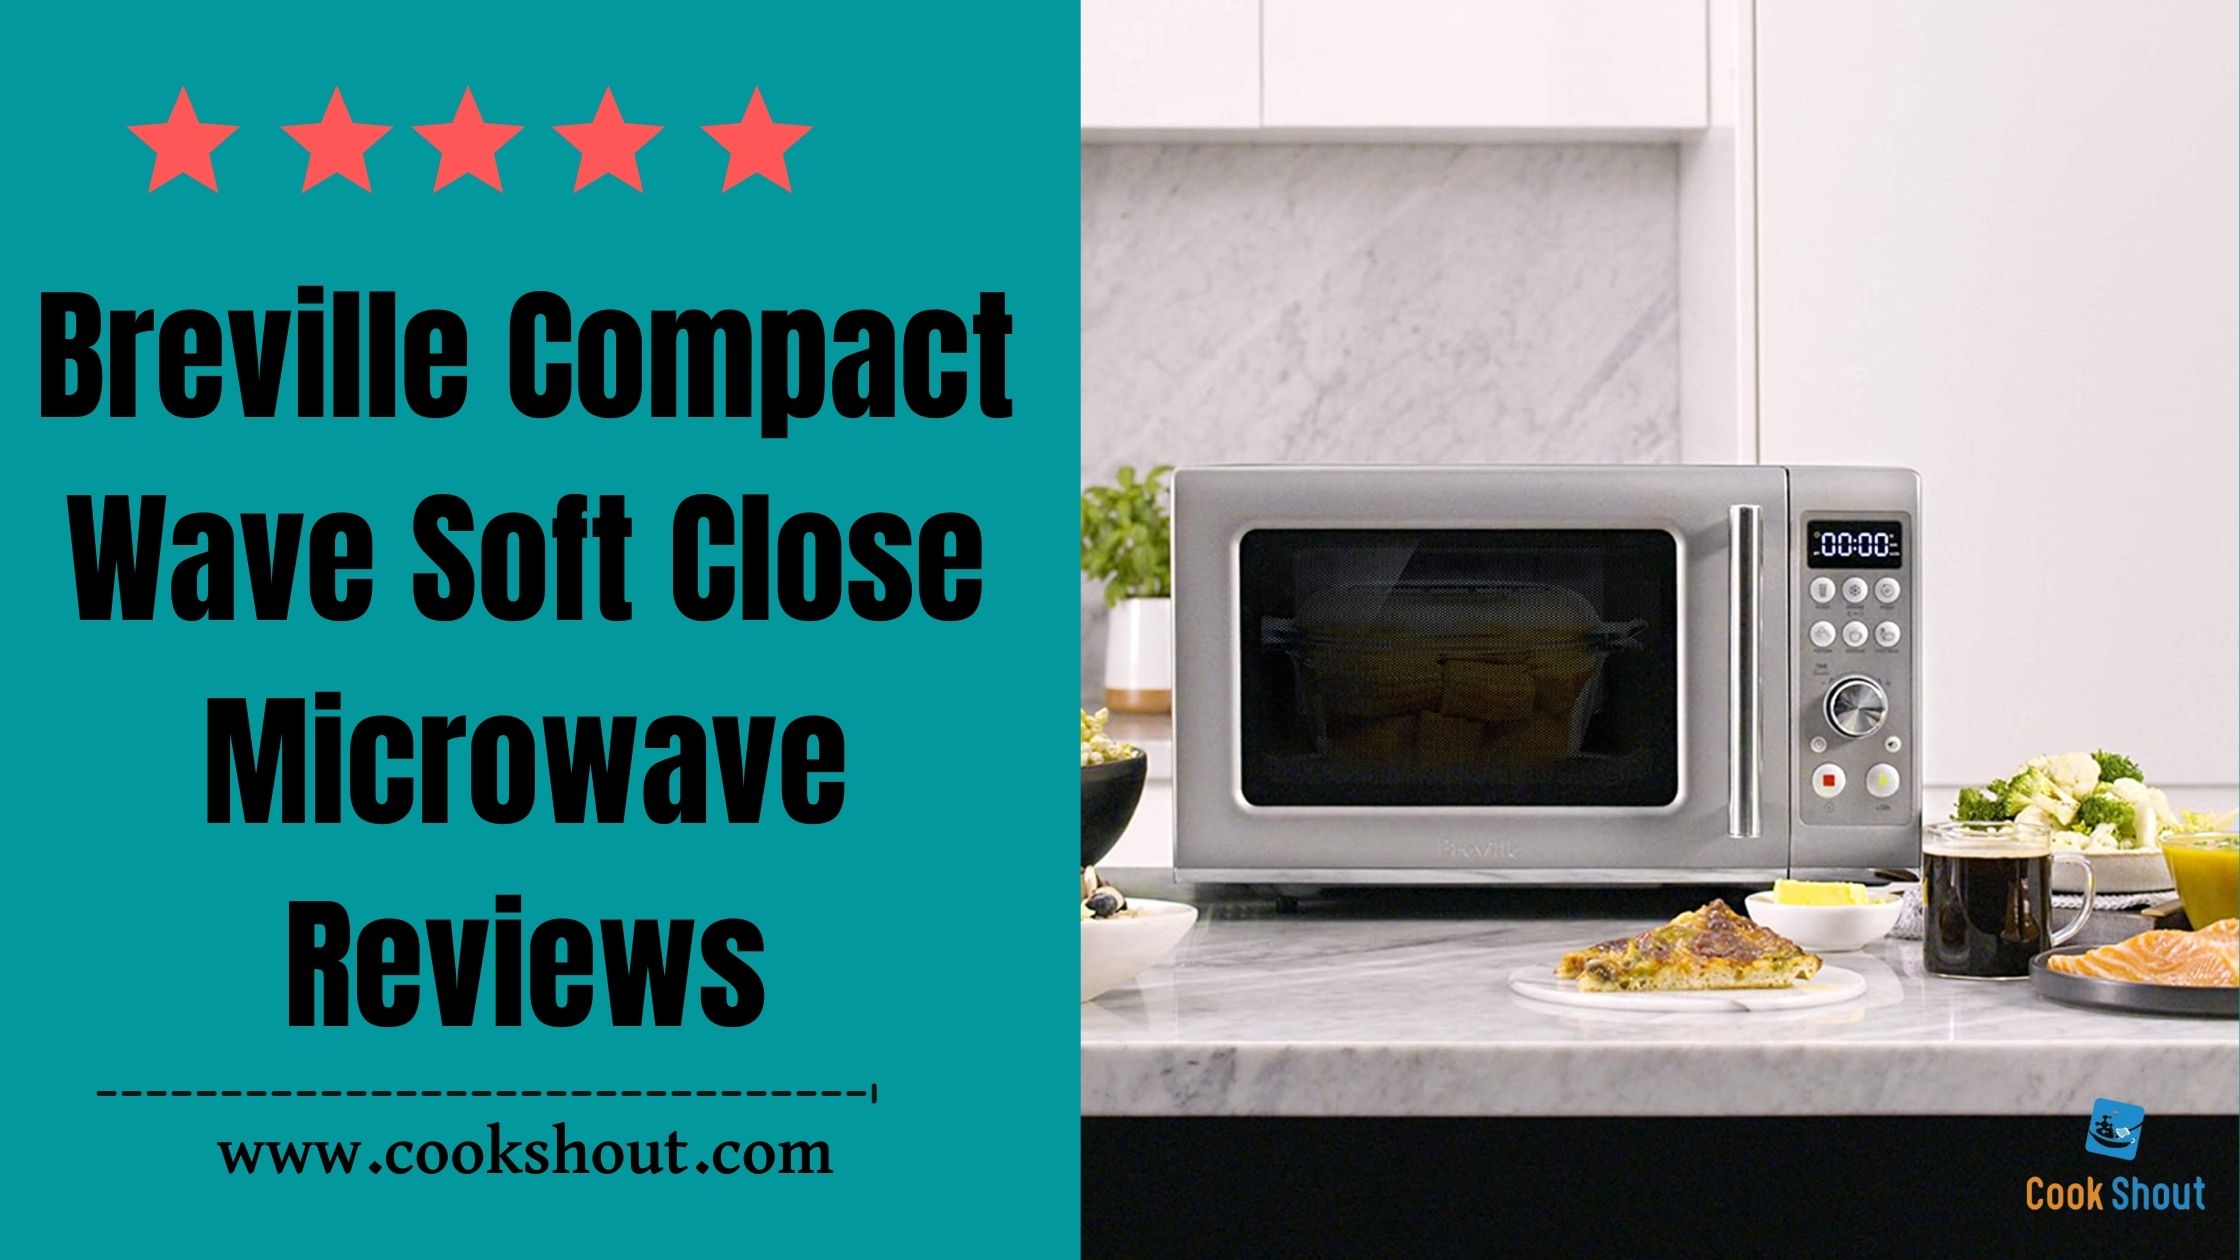 Breville compact soft close microwave - Model: BMO650SIL 